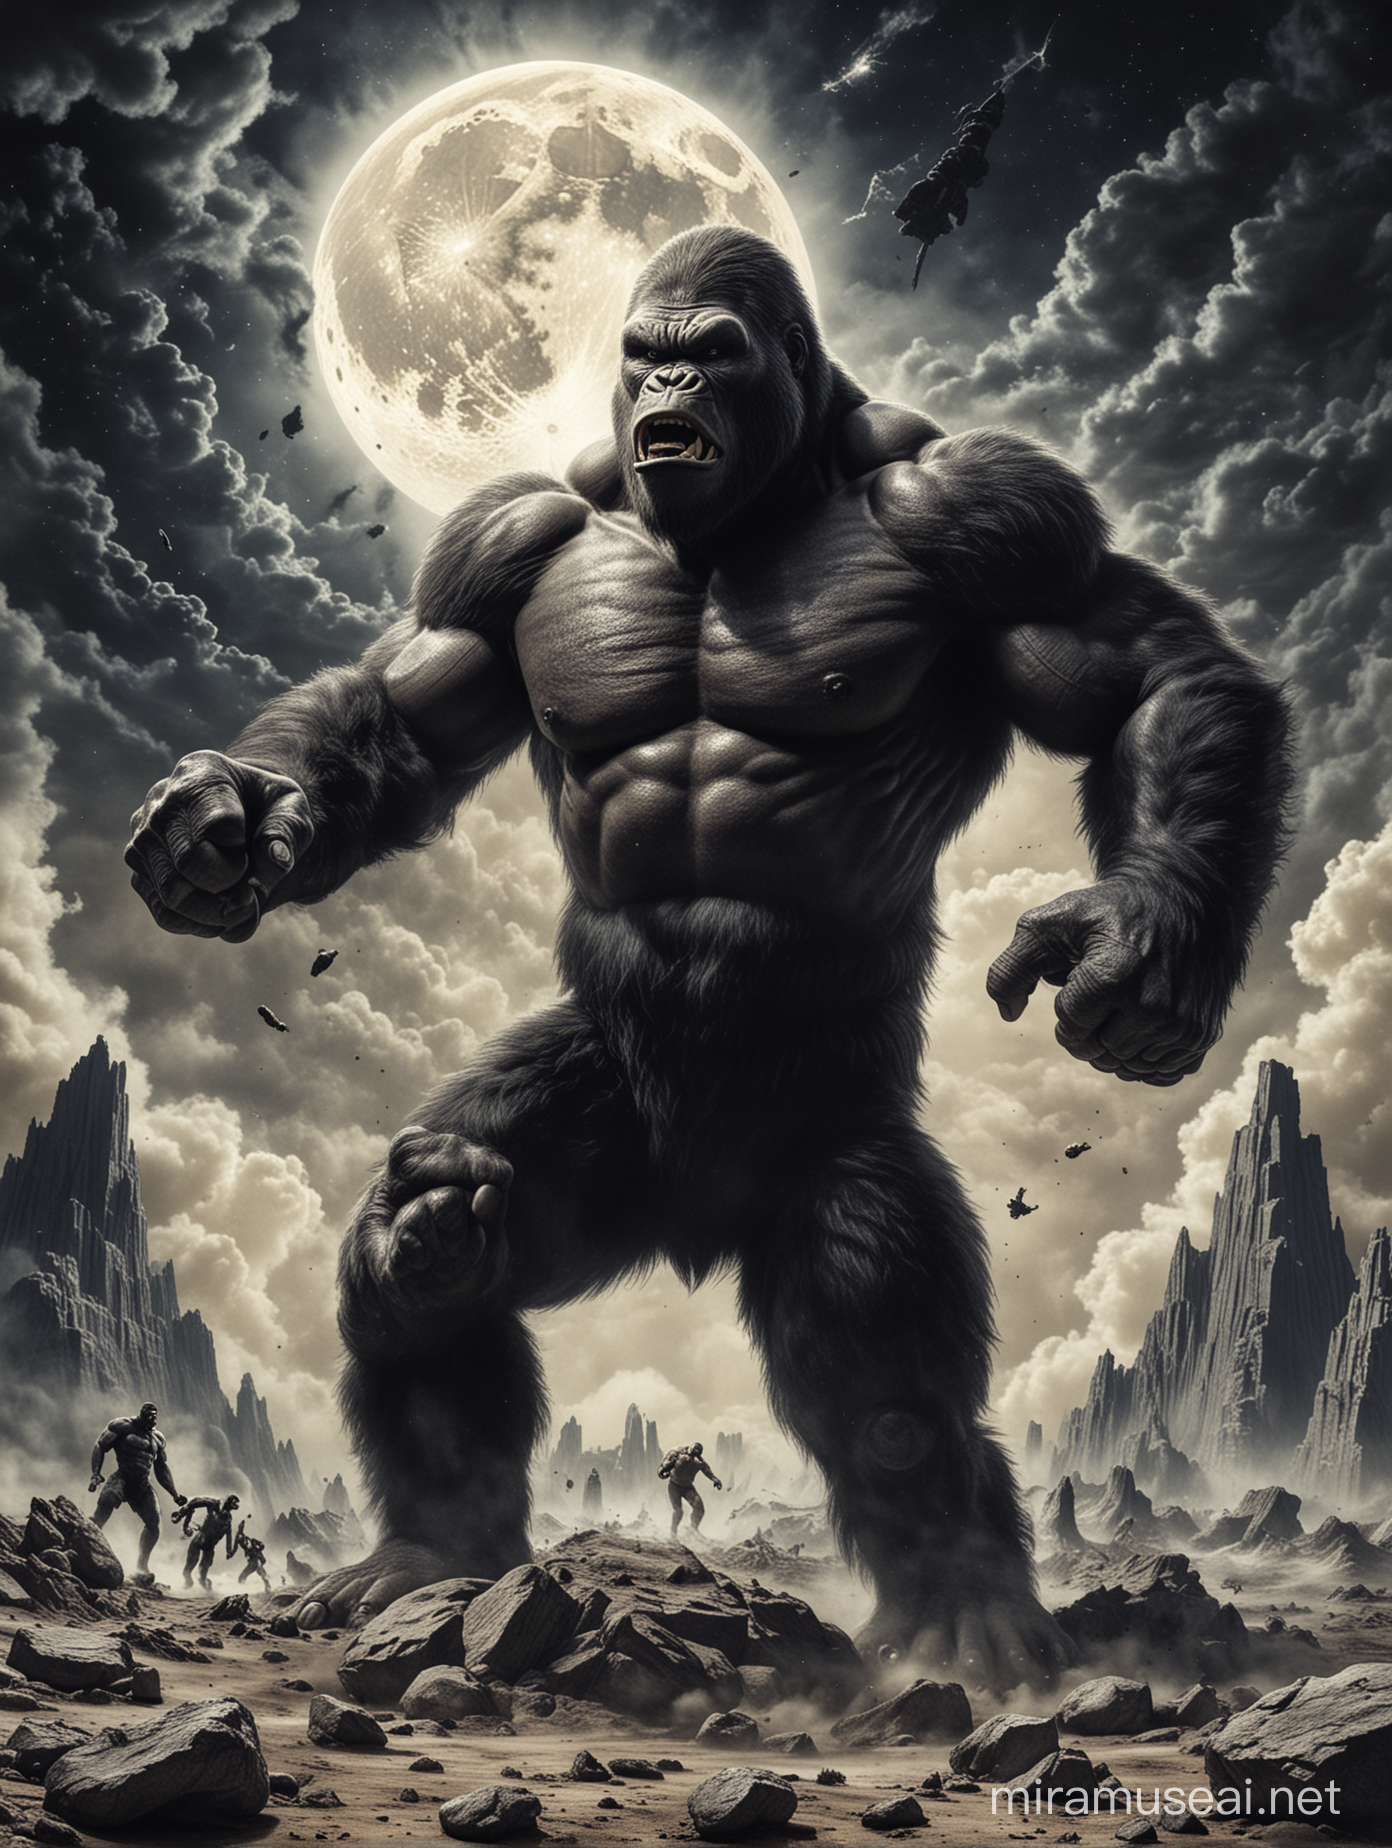 King Kong fighting against Mike Tyson on the moon